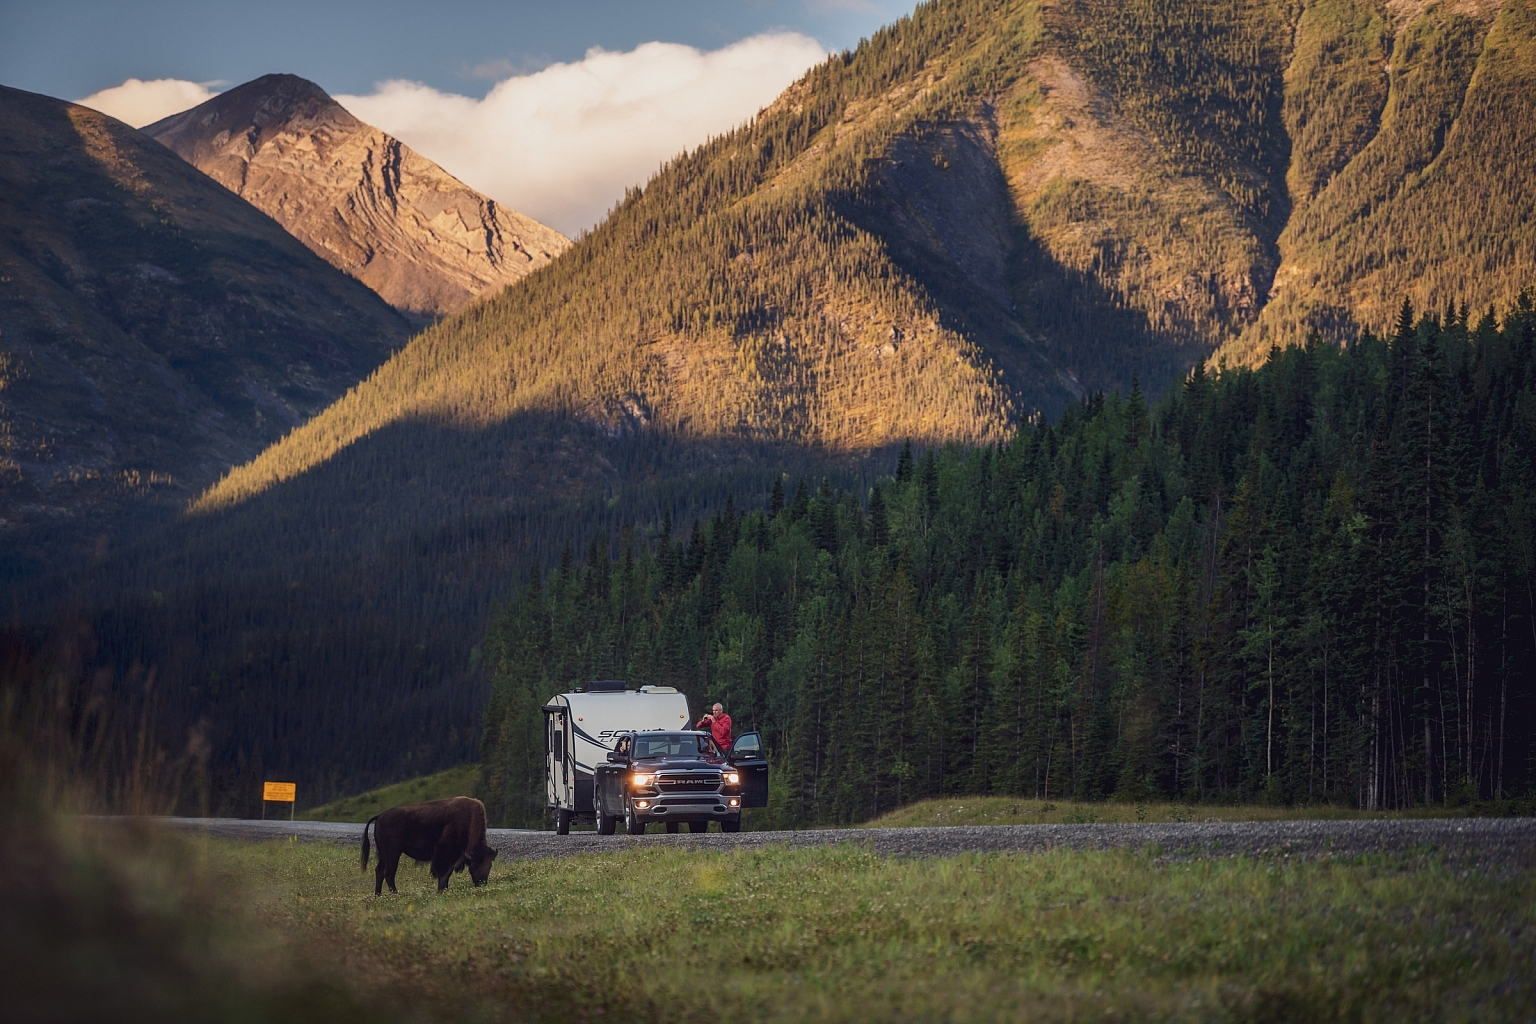 Bison grazing along the sides of the Alaska Highway with mountains in the background.